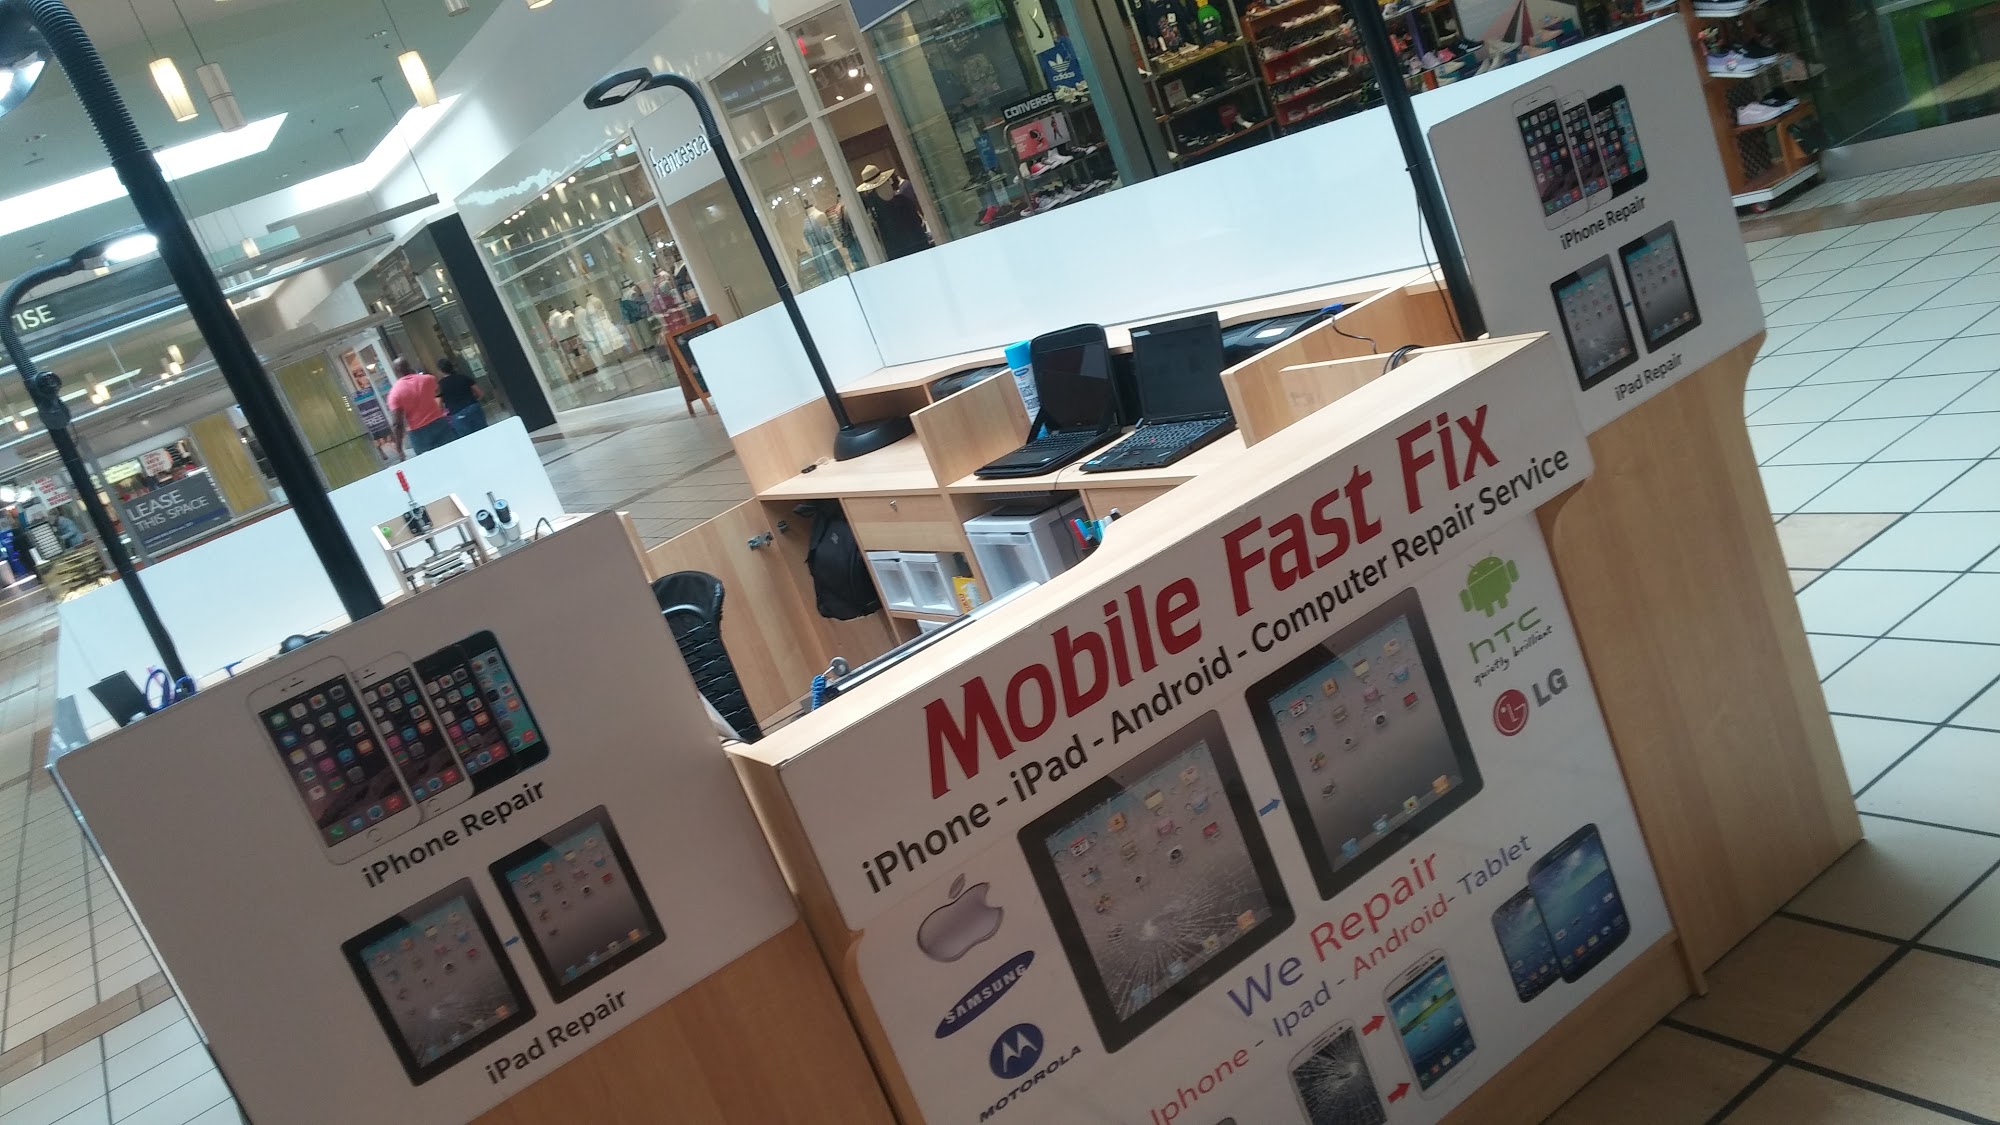 Mobile Fast Fix (Parkdale Mall)